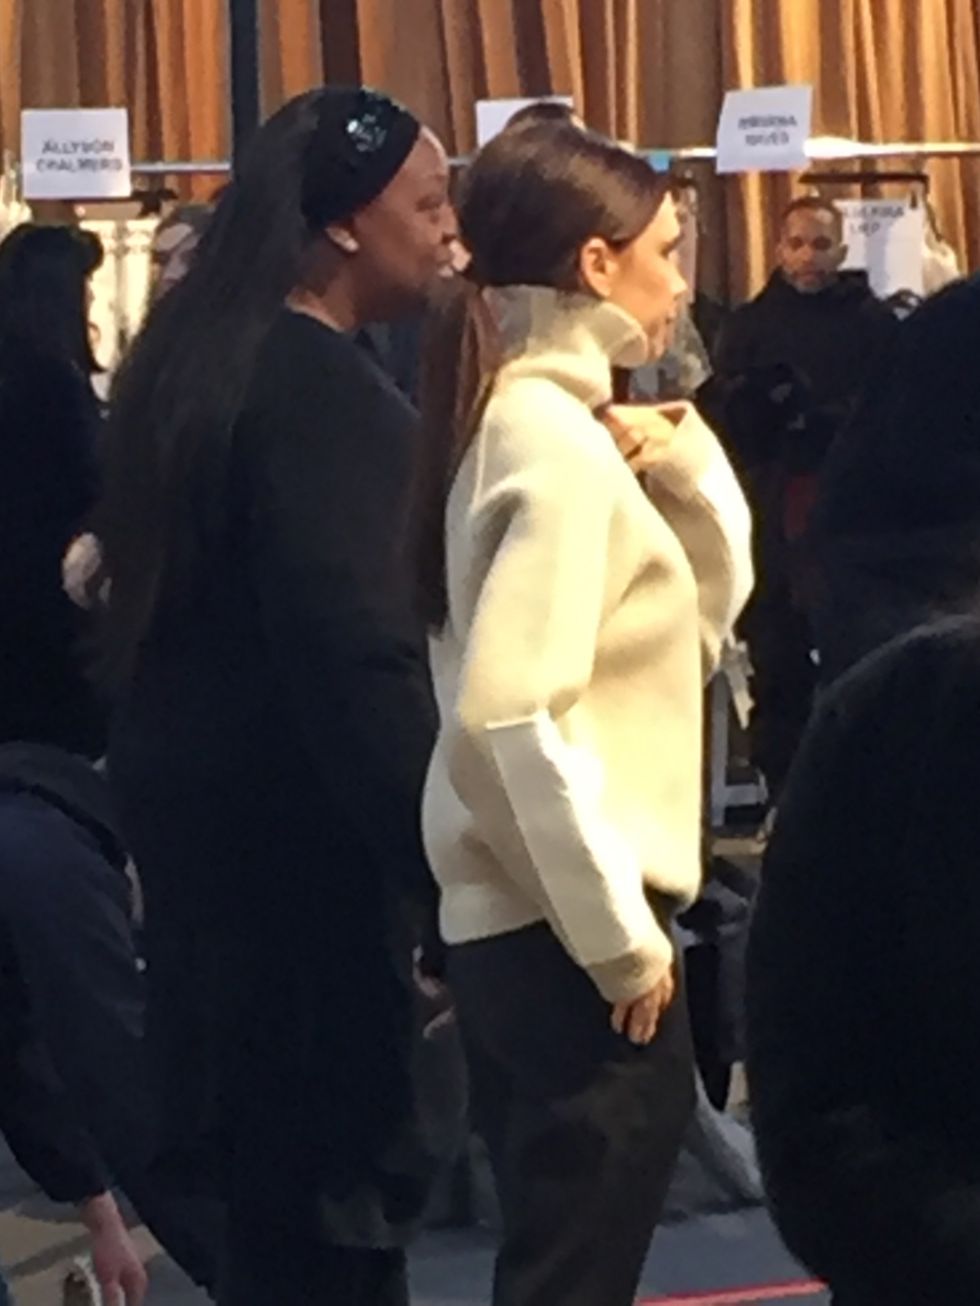 Victoria Beckham and Pat McGrath looking over the lineup. I like to think they're deciding which two girls are getting the hero deep red lip look.